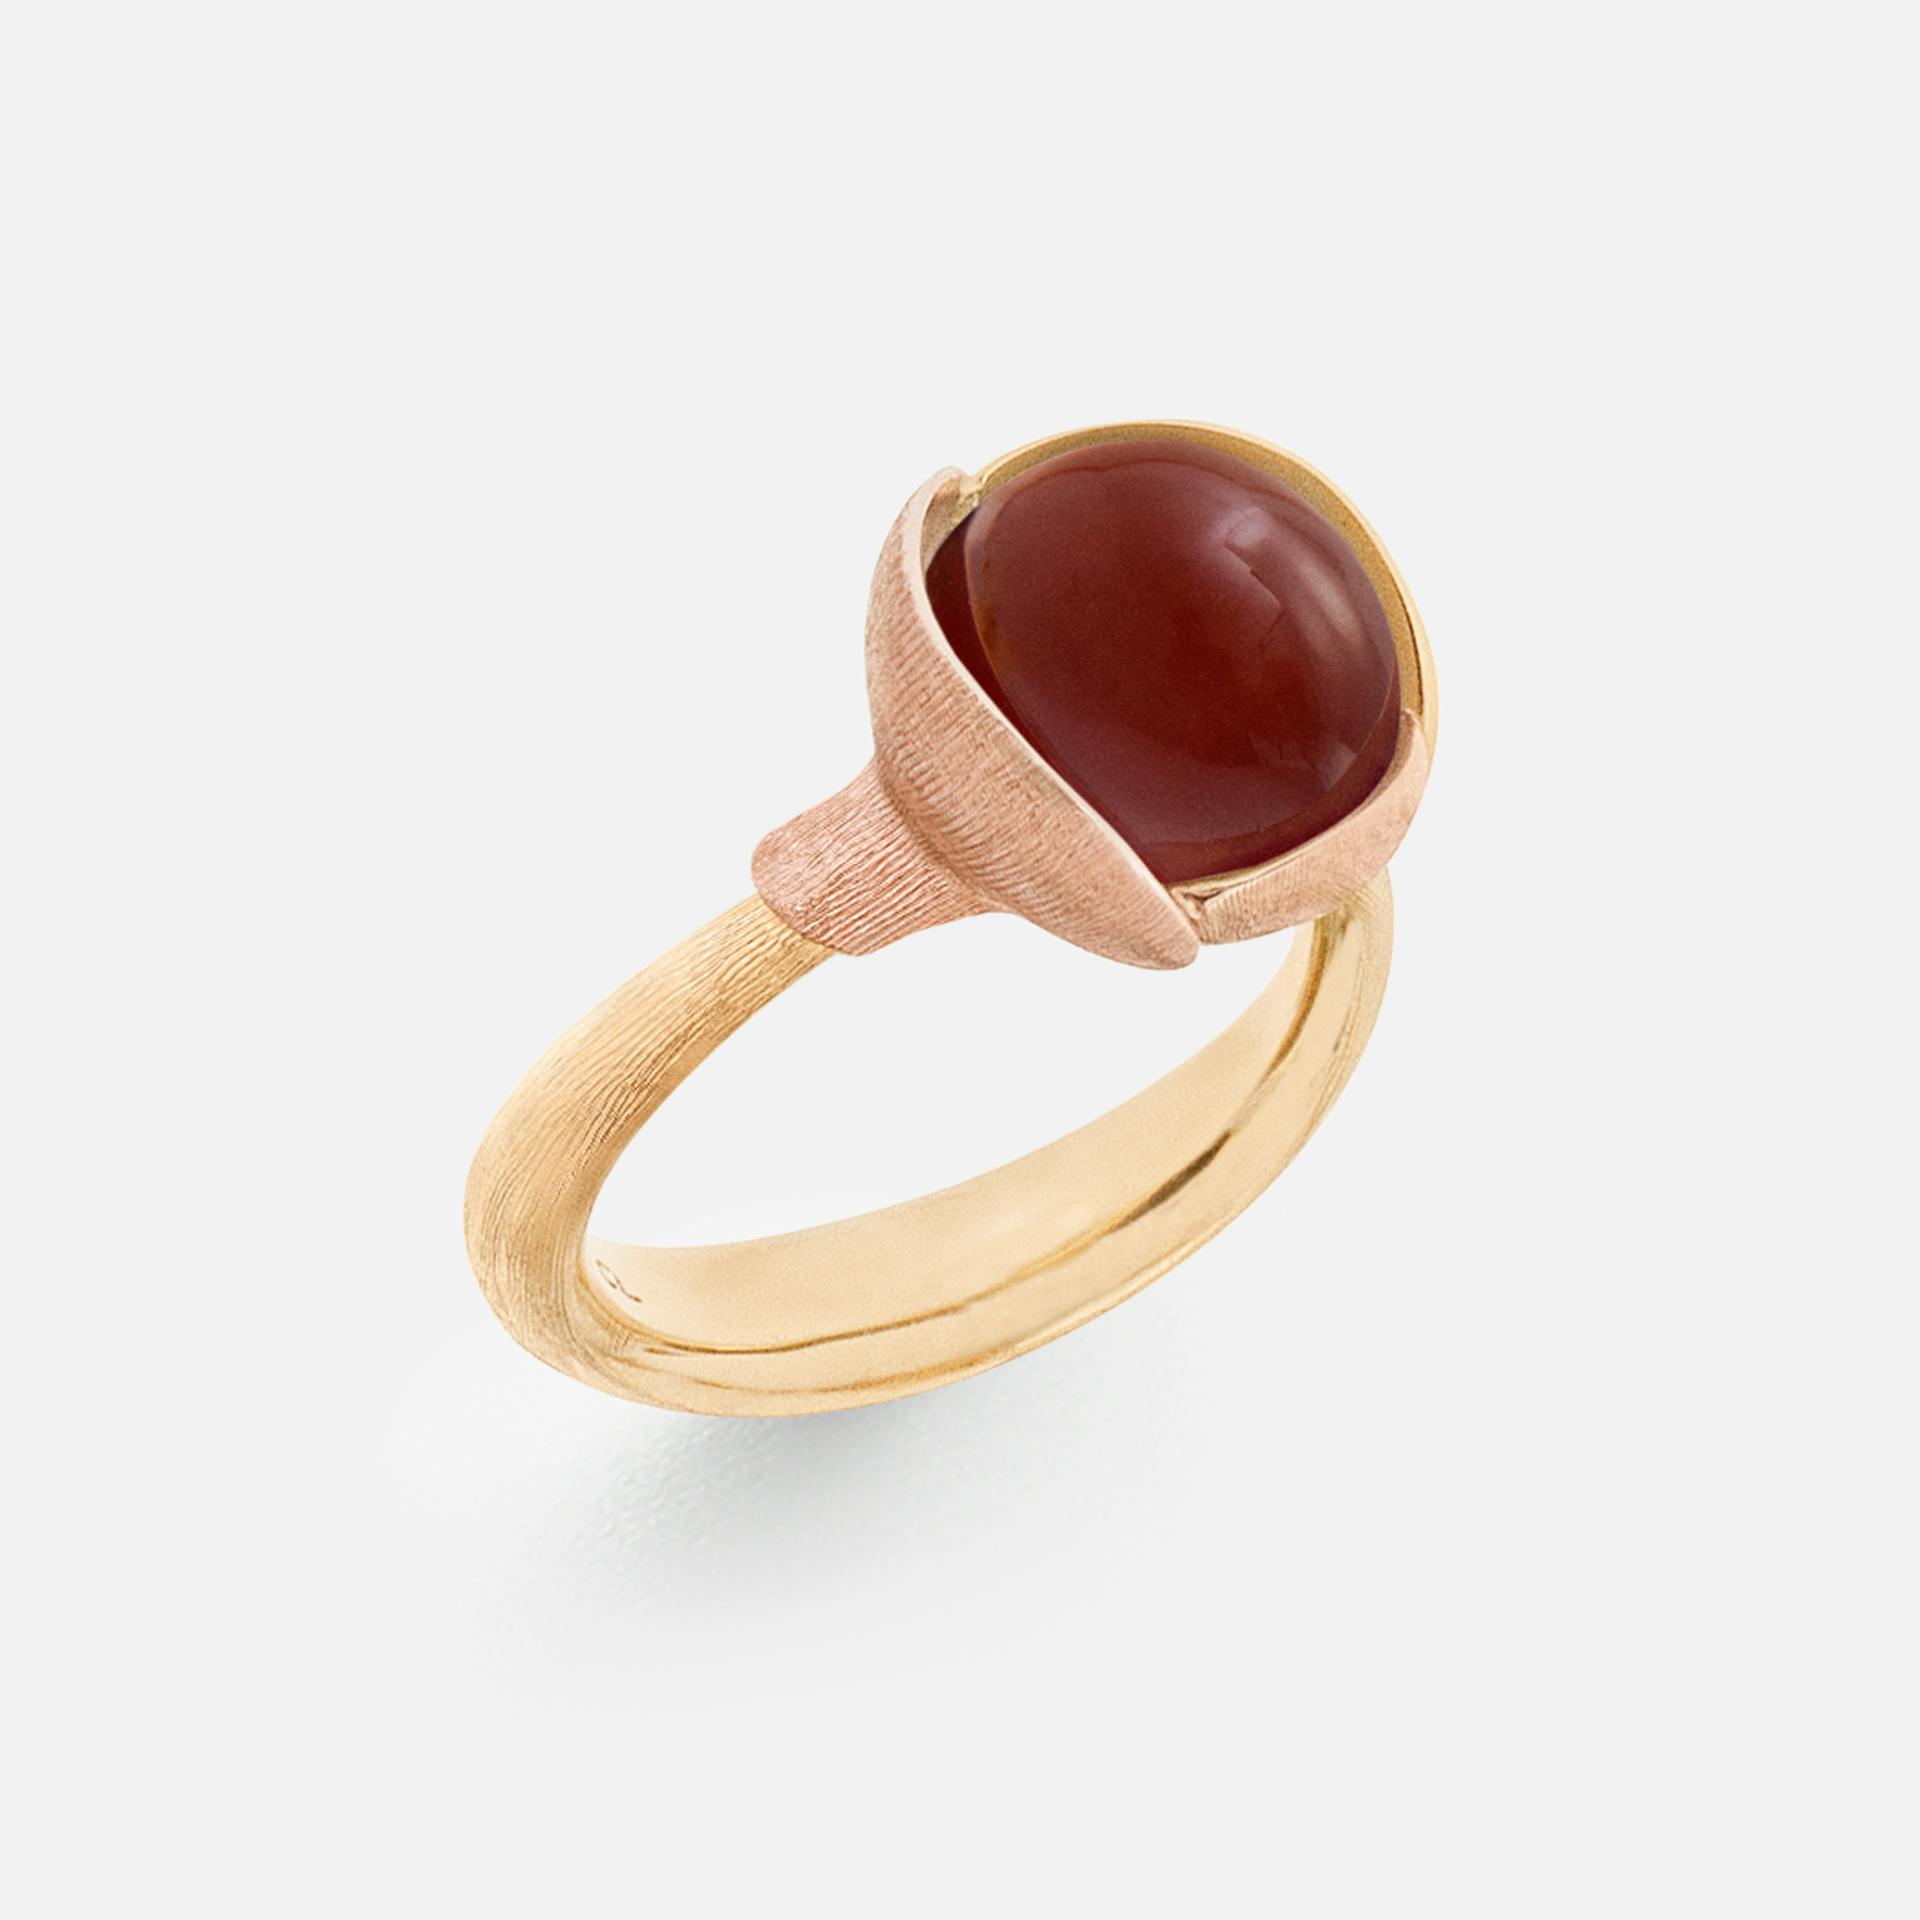 Lotus Ring size 2 in Yellow and Rose Gold  with Carnelian  |  Ole Lynggaard Copenhagen